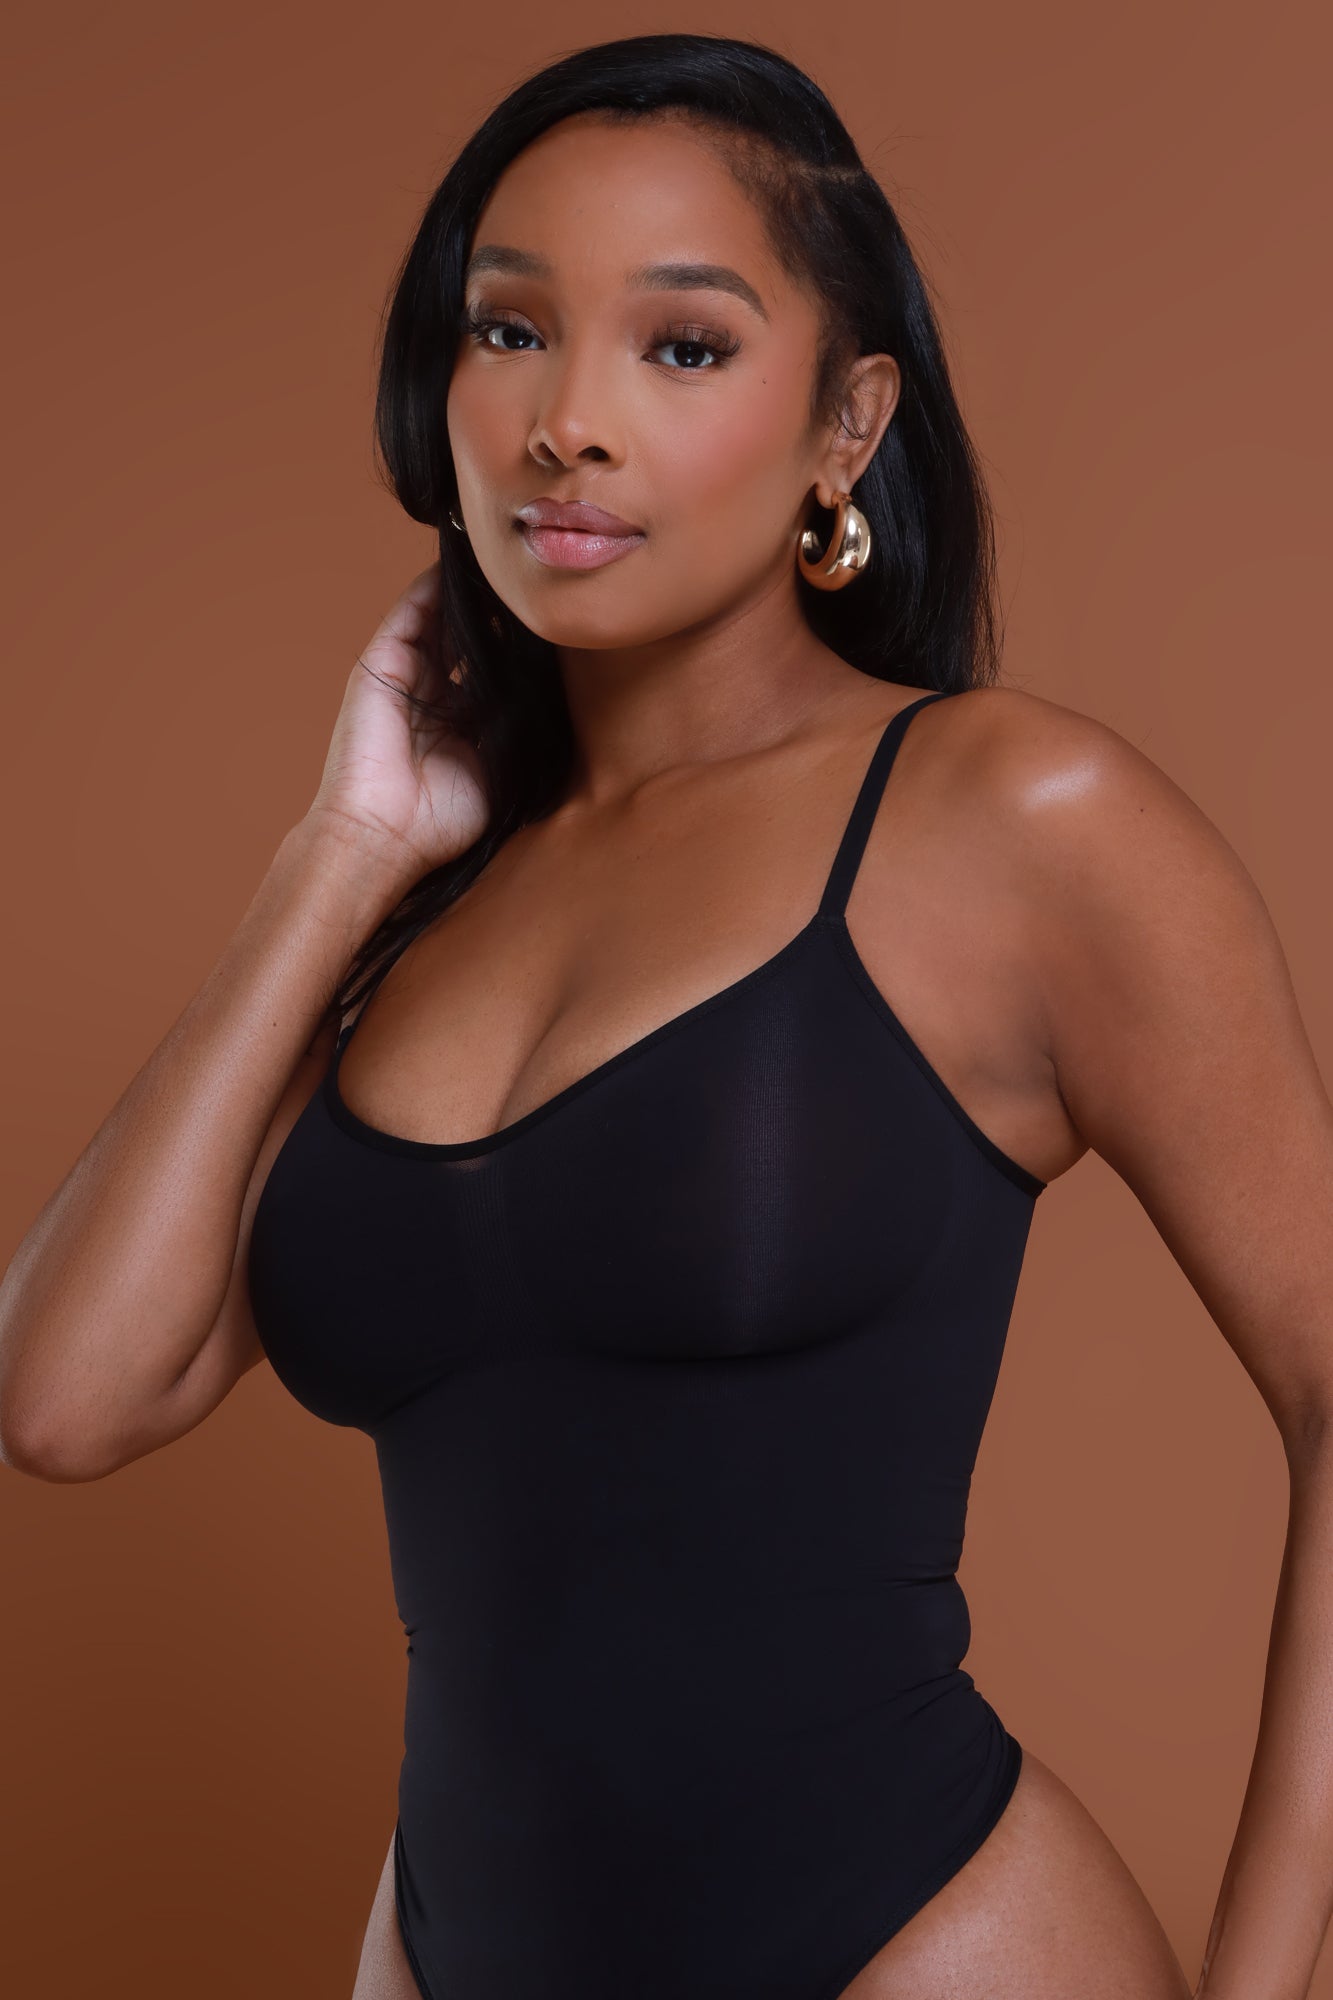 Sculpted To Perfection Shapewear Bodysuit - Black